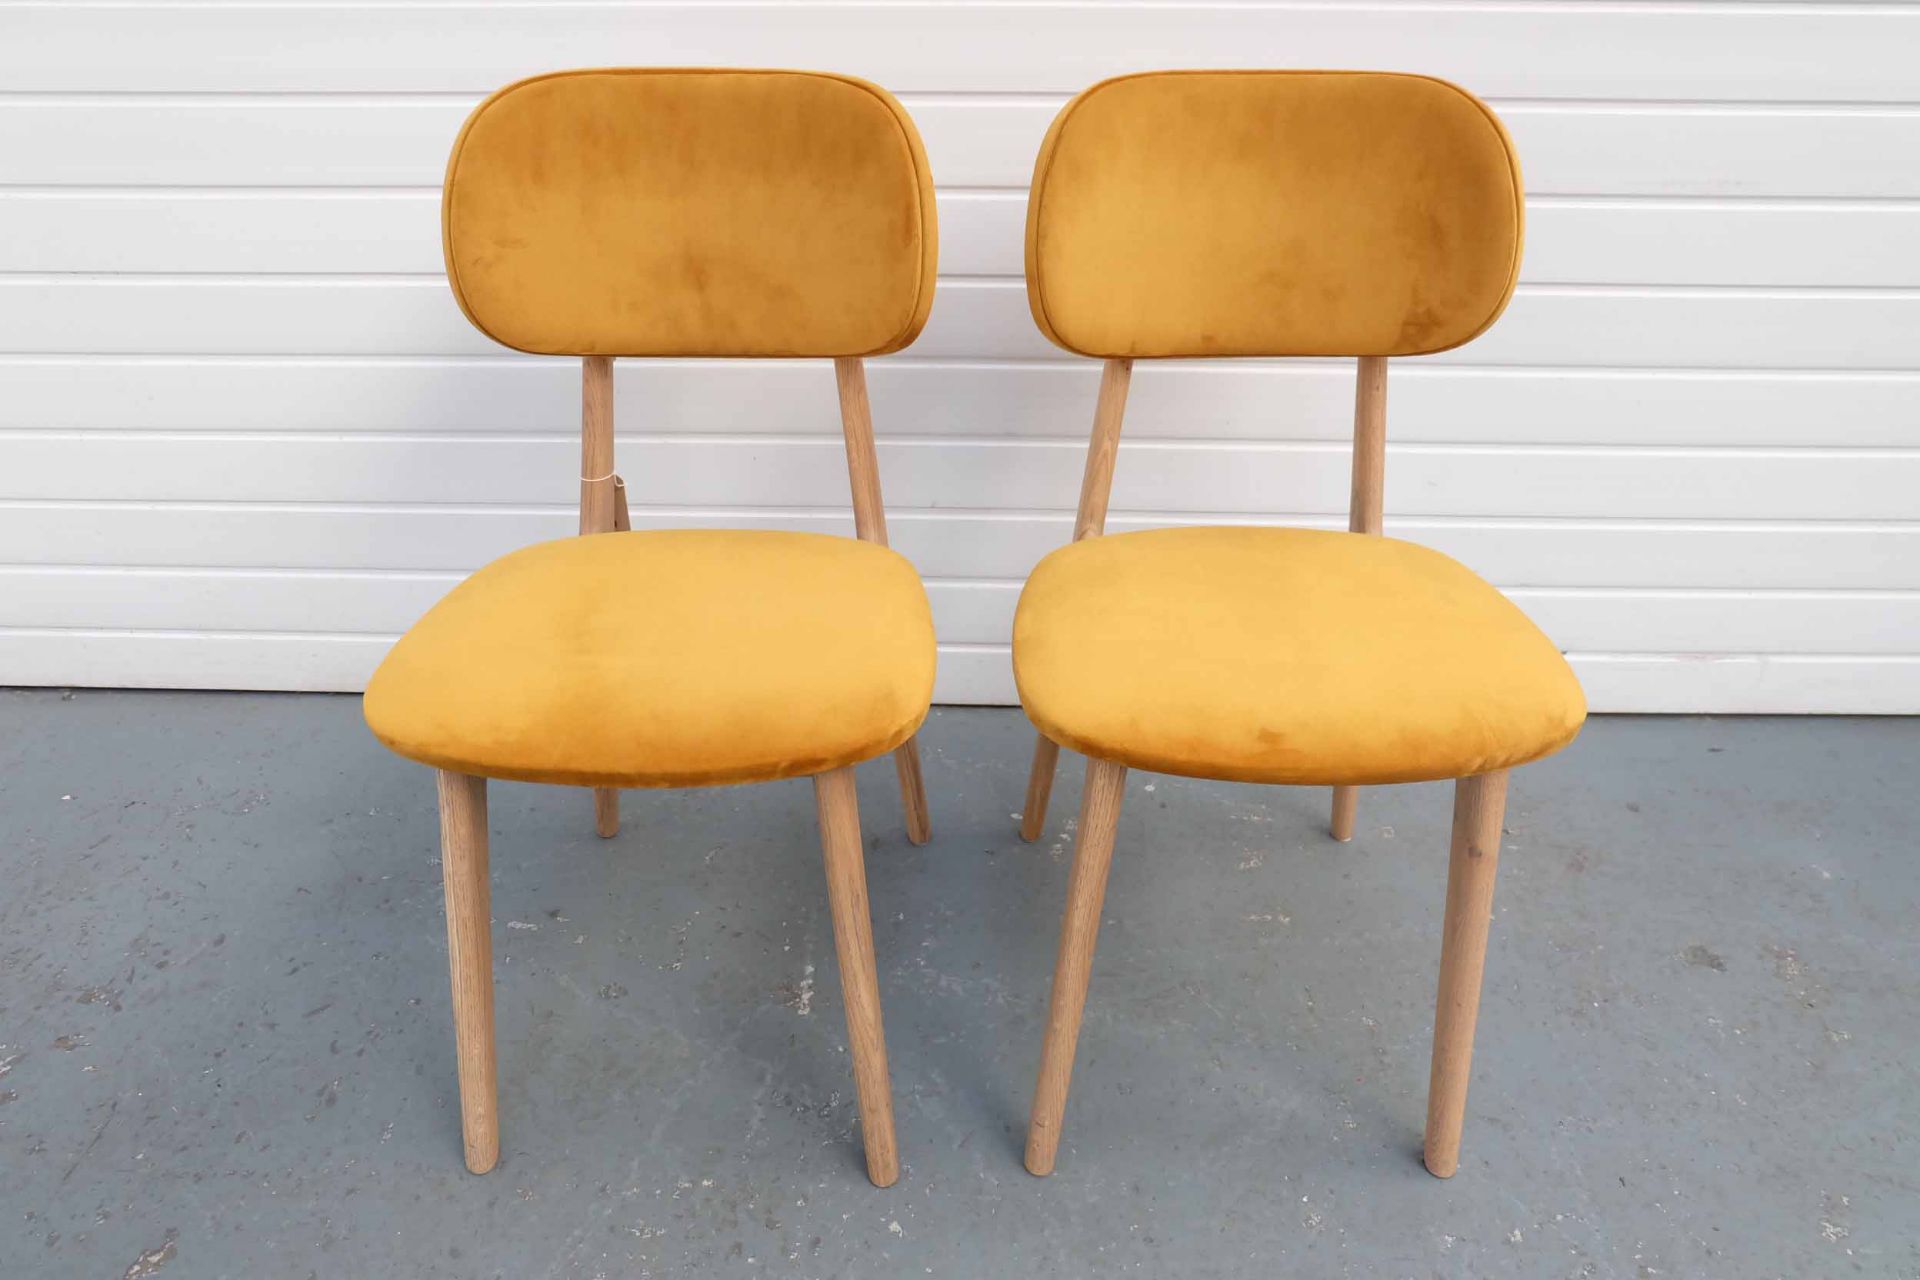 Pair of Carton Furniture 'Bari' Dining Chairs. Upholstered Seat and Back in Mustard Velvet. - Image 2 of 6